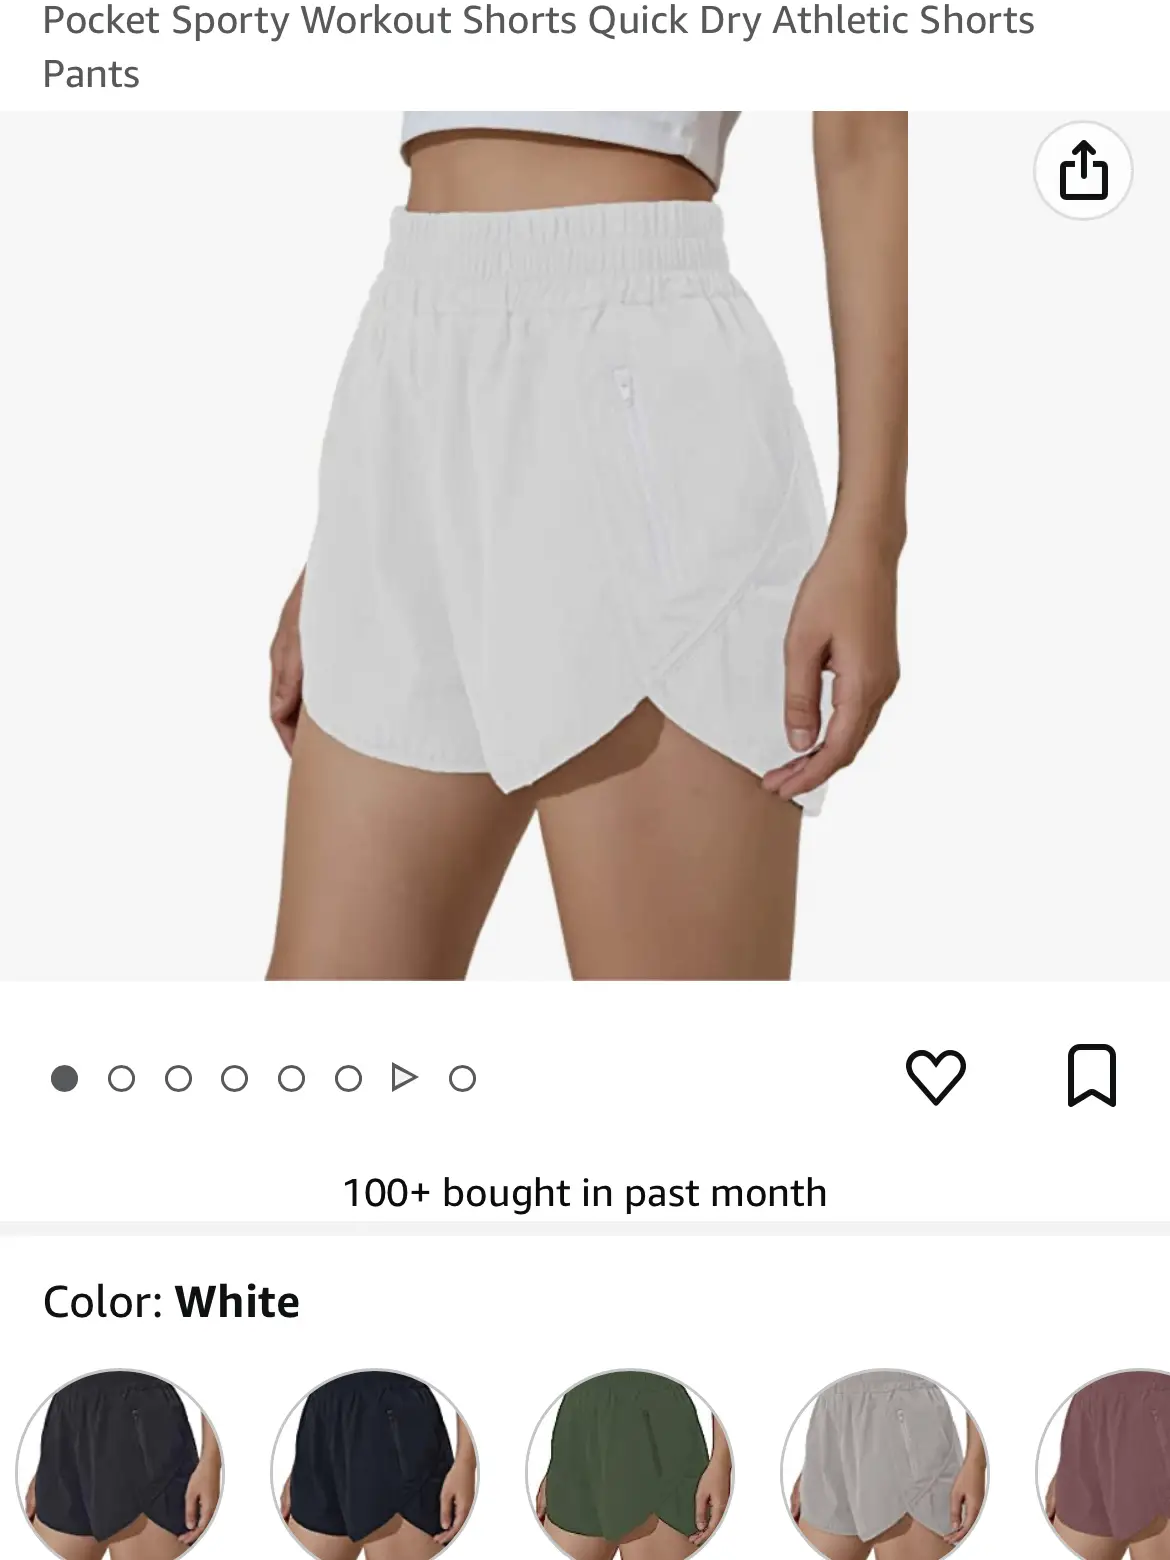 20 top Lululemon Dupes Shorts ideas in 2024